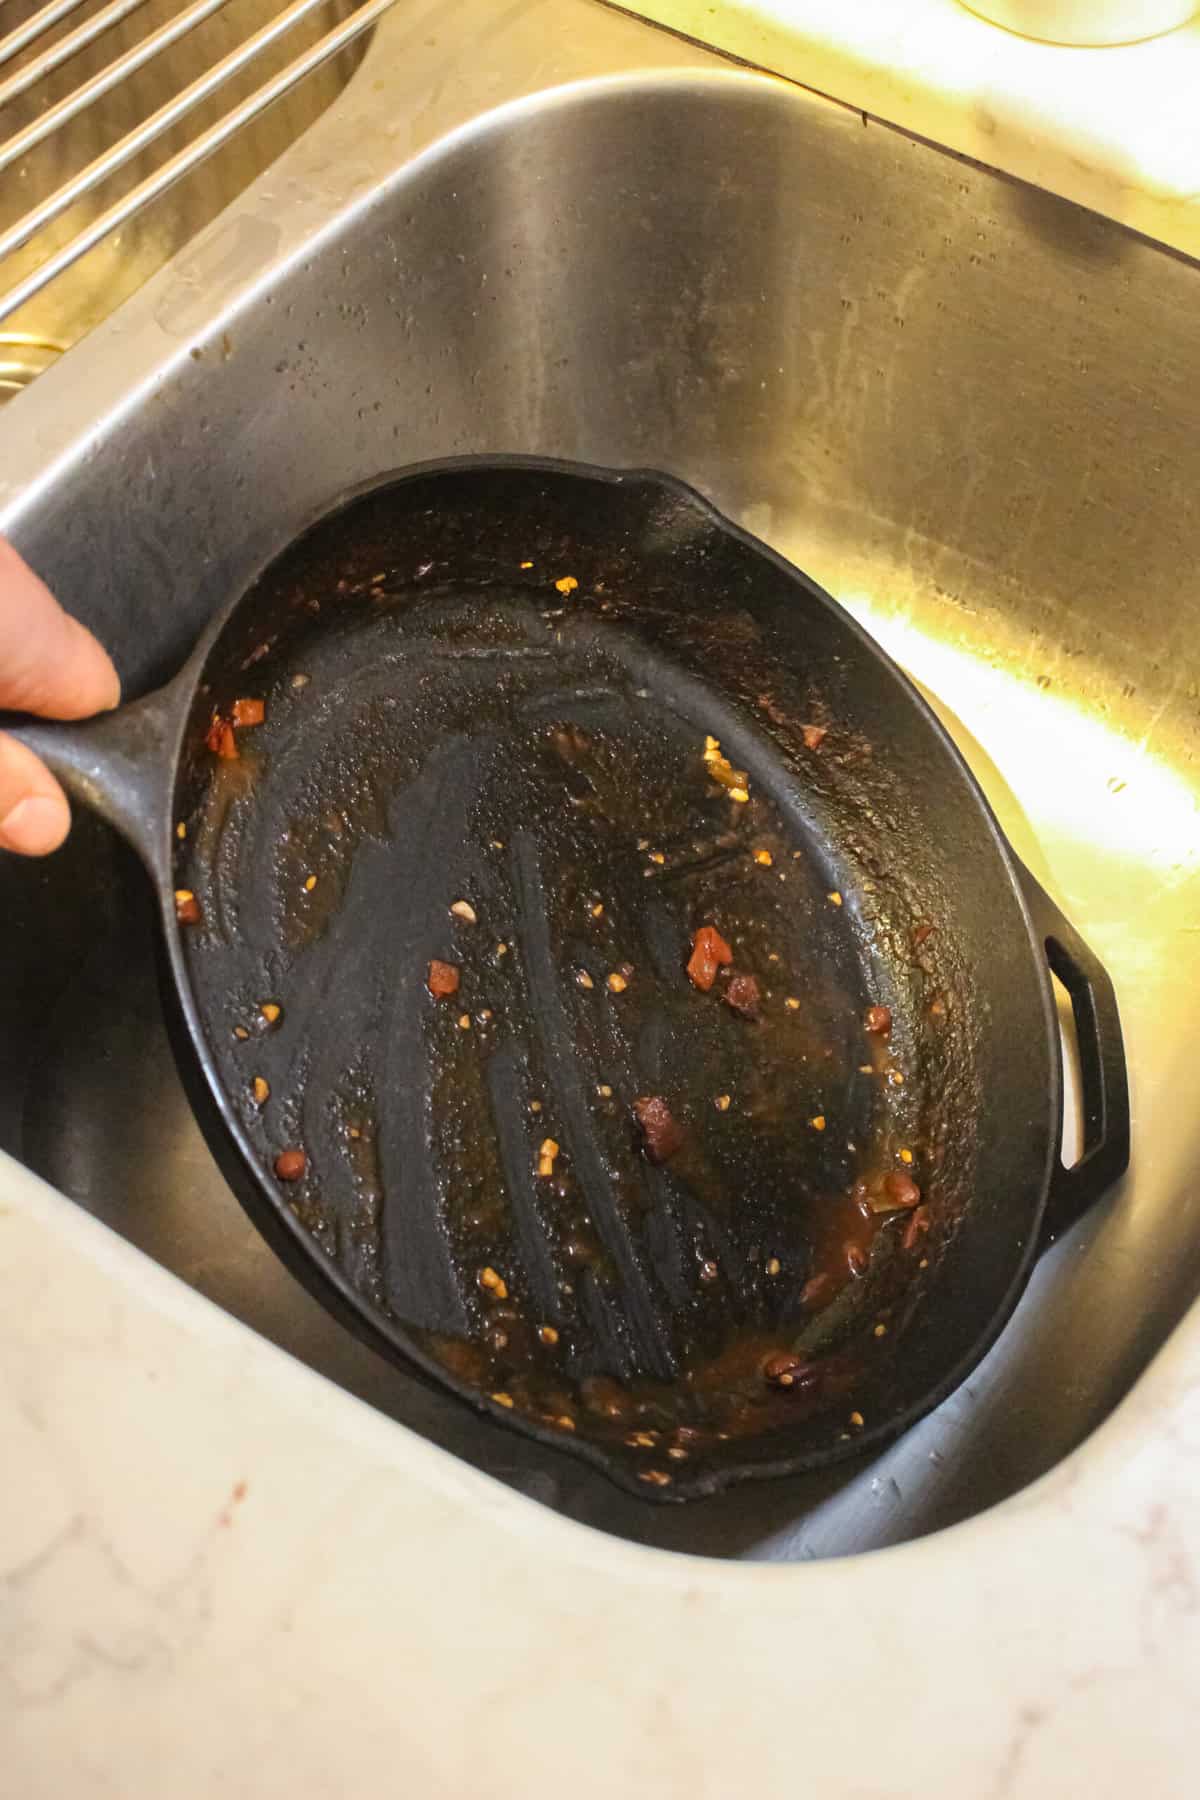 A dirty cast iron pan with stuck food bits on it.